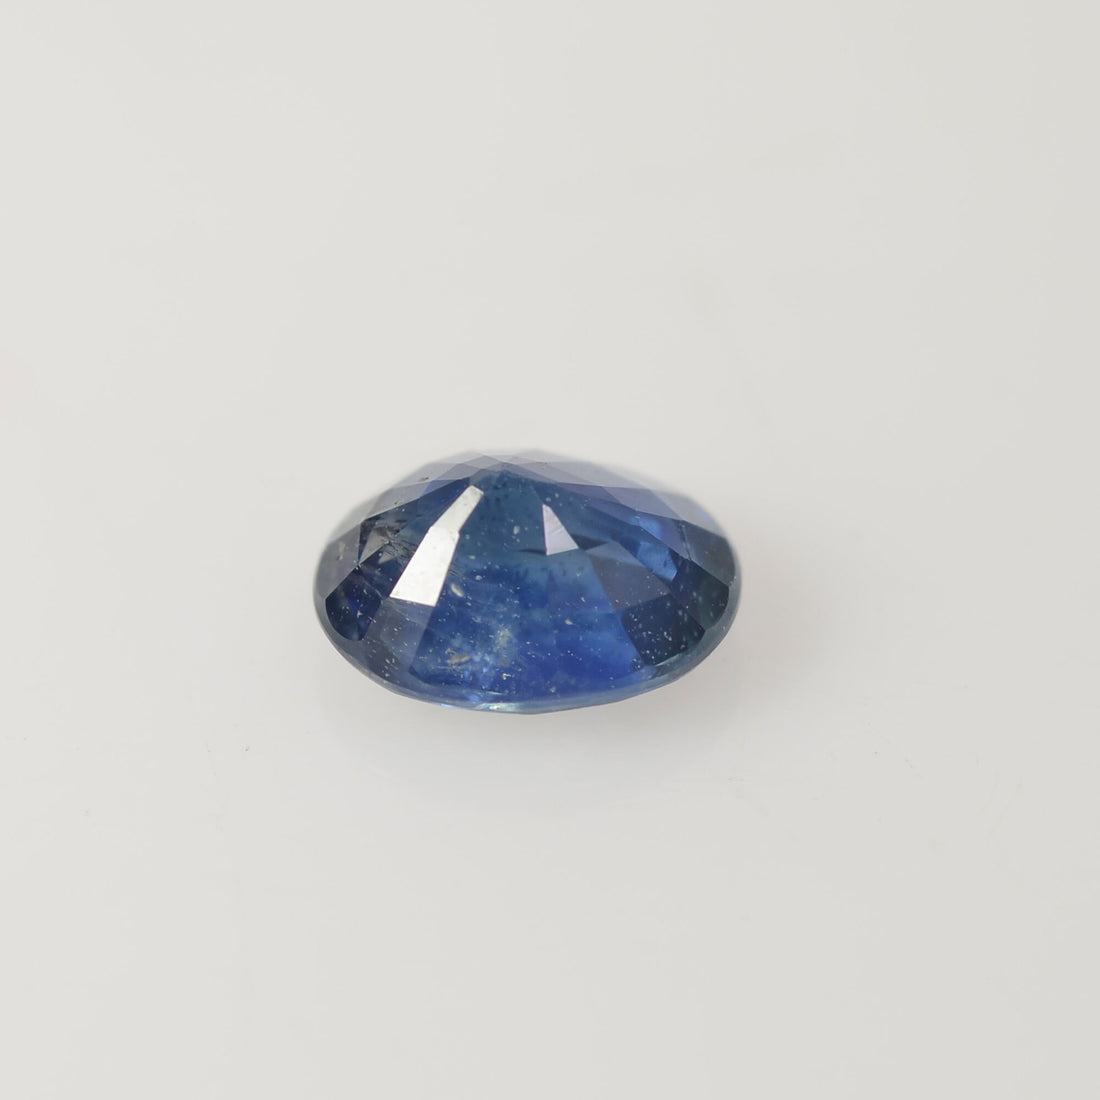 0.54 cts Natural Blue Green Teal Sapphire Loose Gemstone Oval Cut